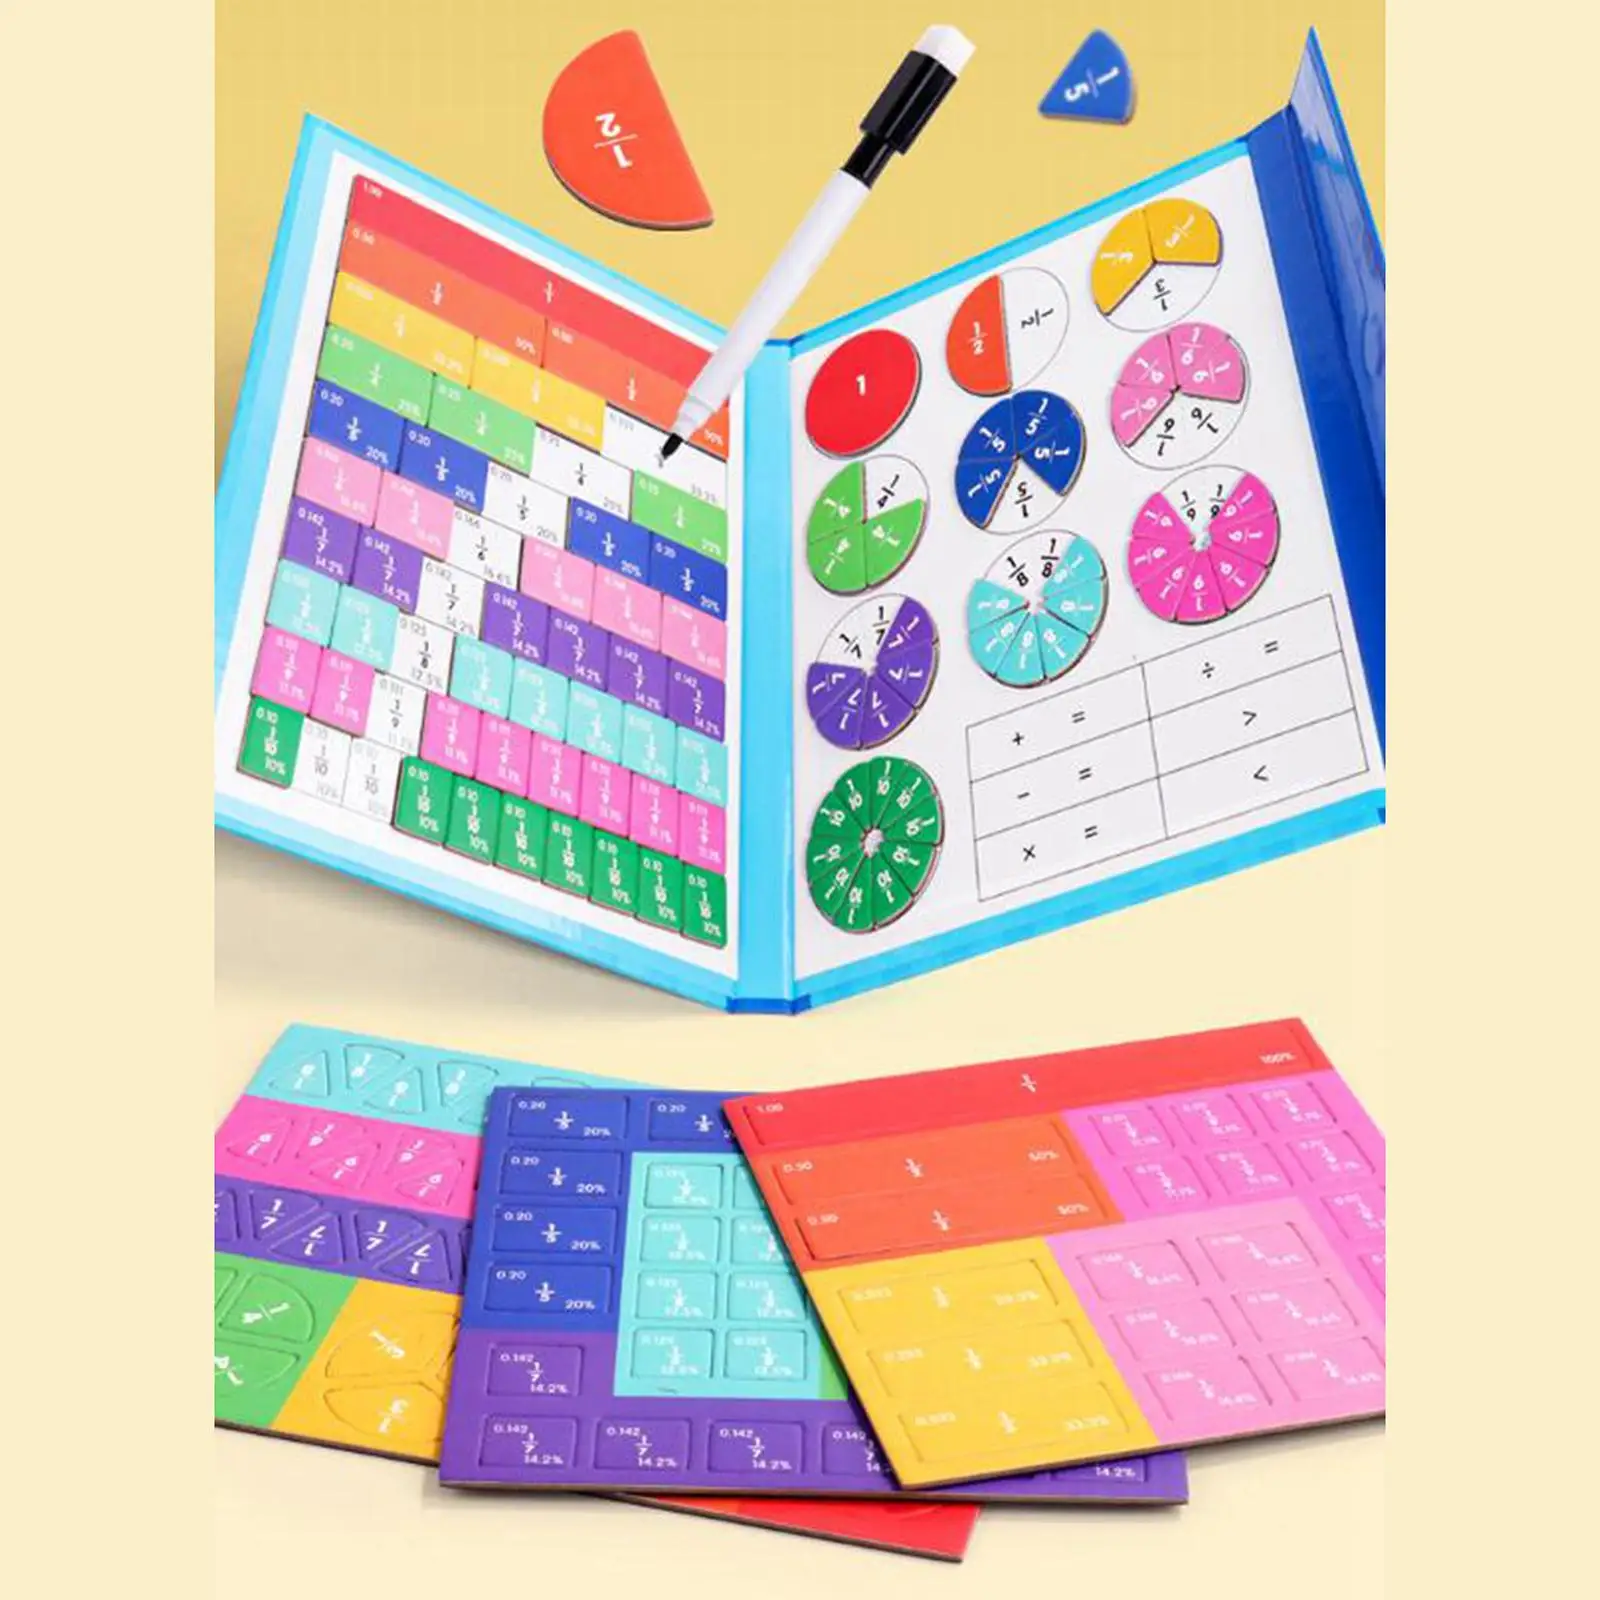 Fraction Learning Math Toys Supplies Arithmetic Math Teaching Tools Fraction Teaching Aids for Living Room Home Gift Unisex Kids